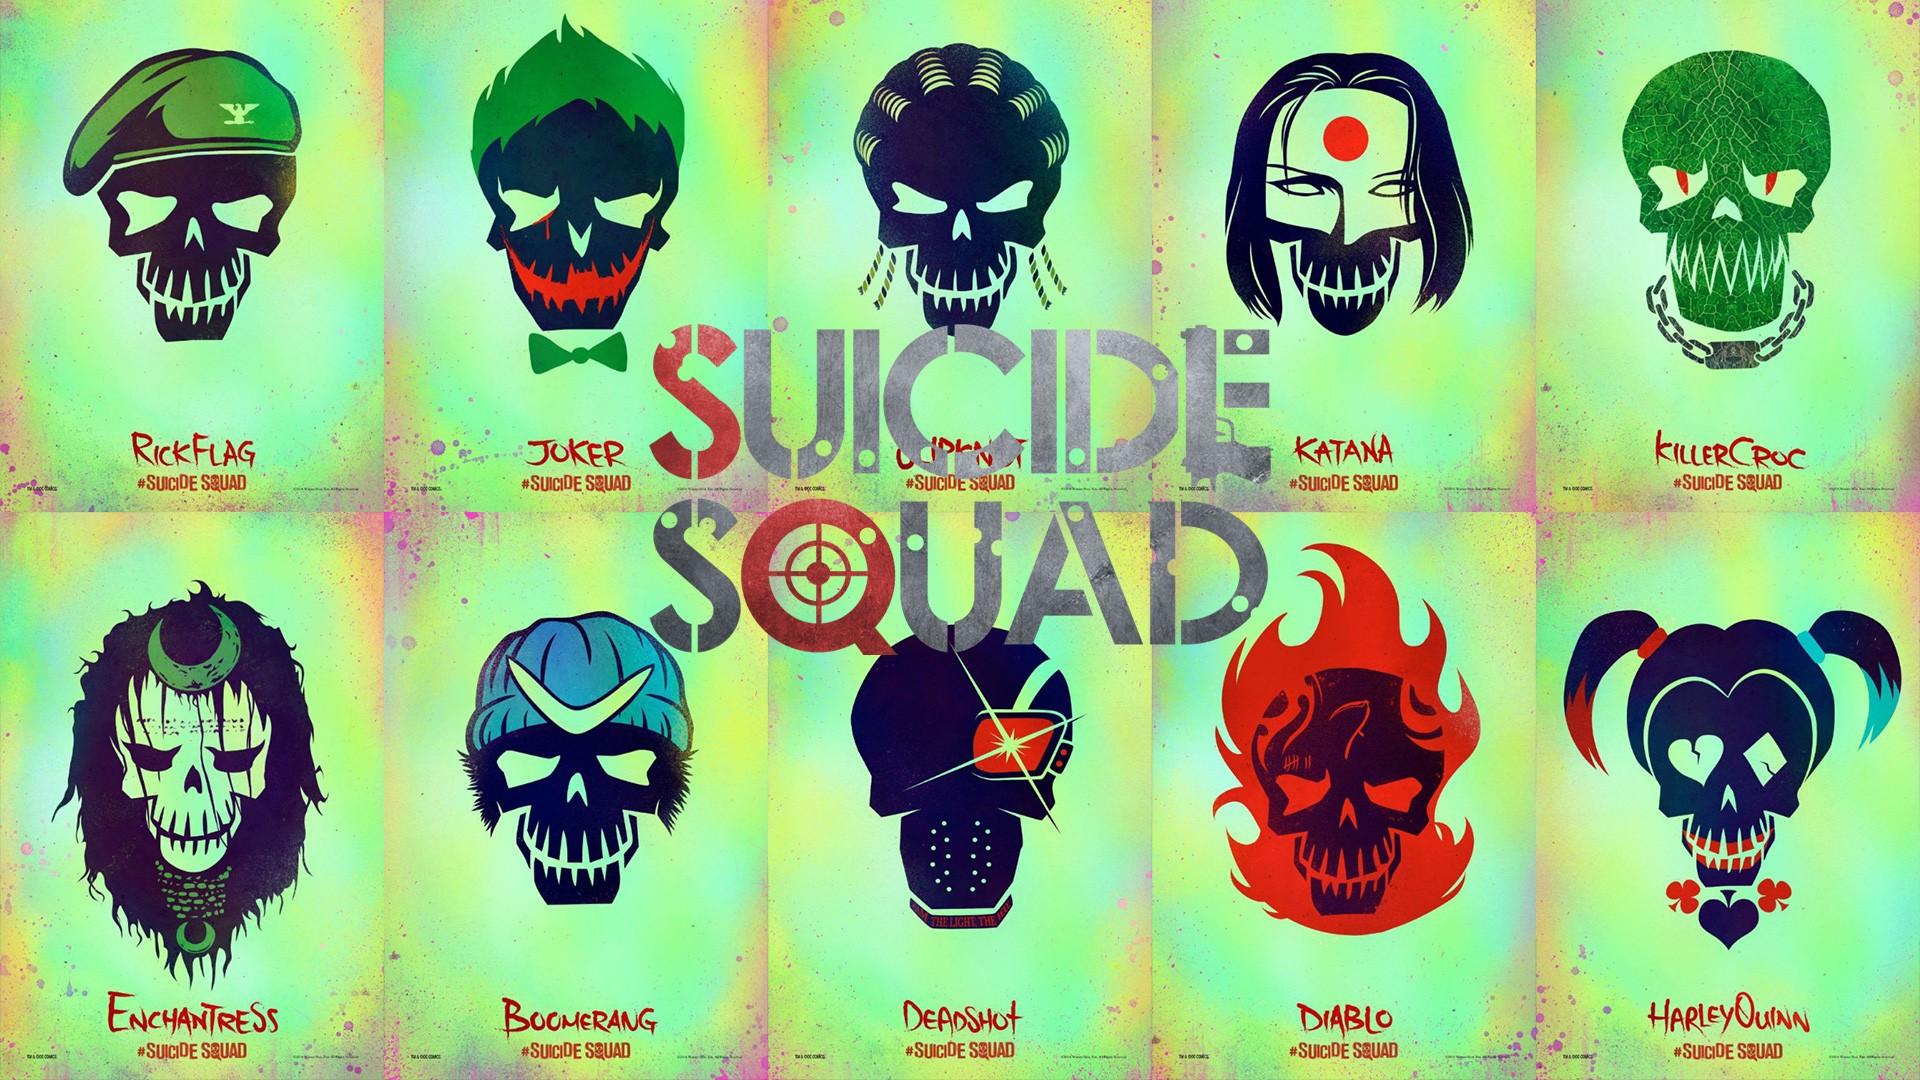 Suicide Squad backgroundDownload free awesome HD wallpaper